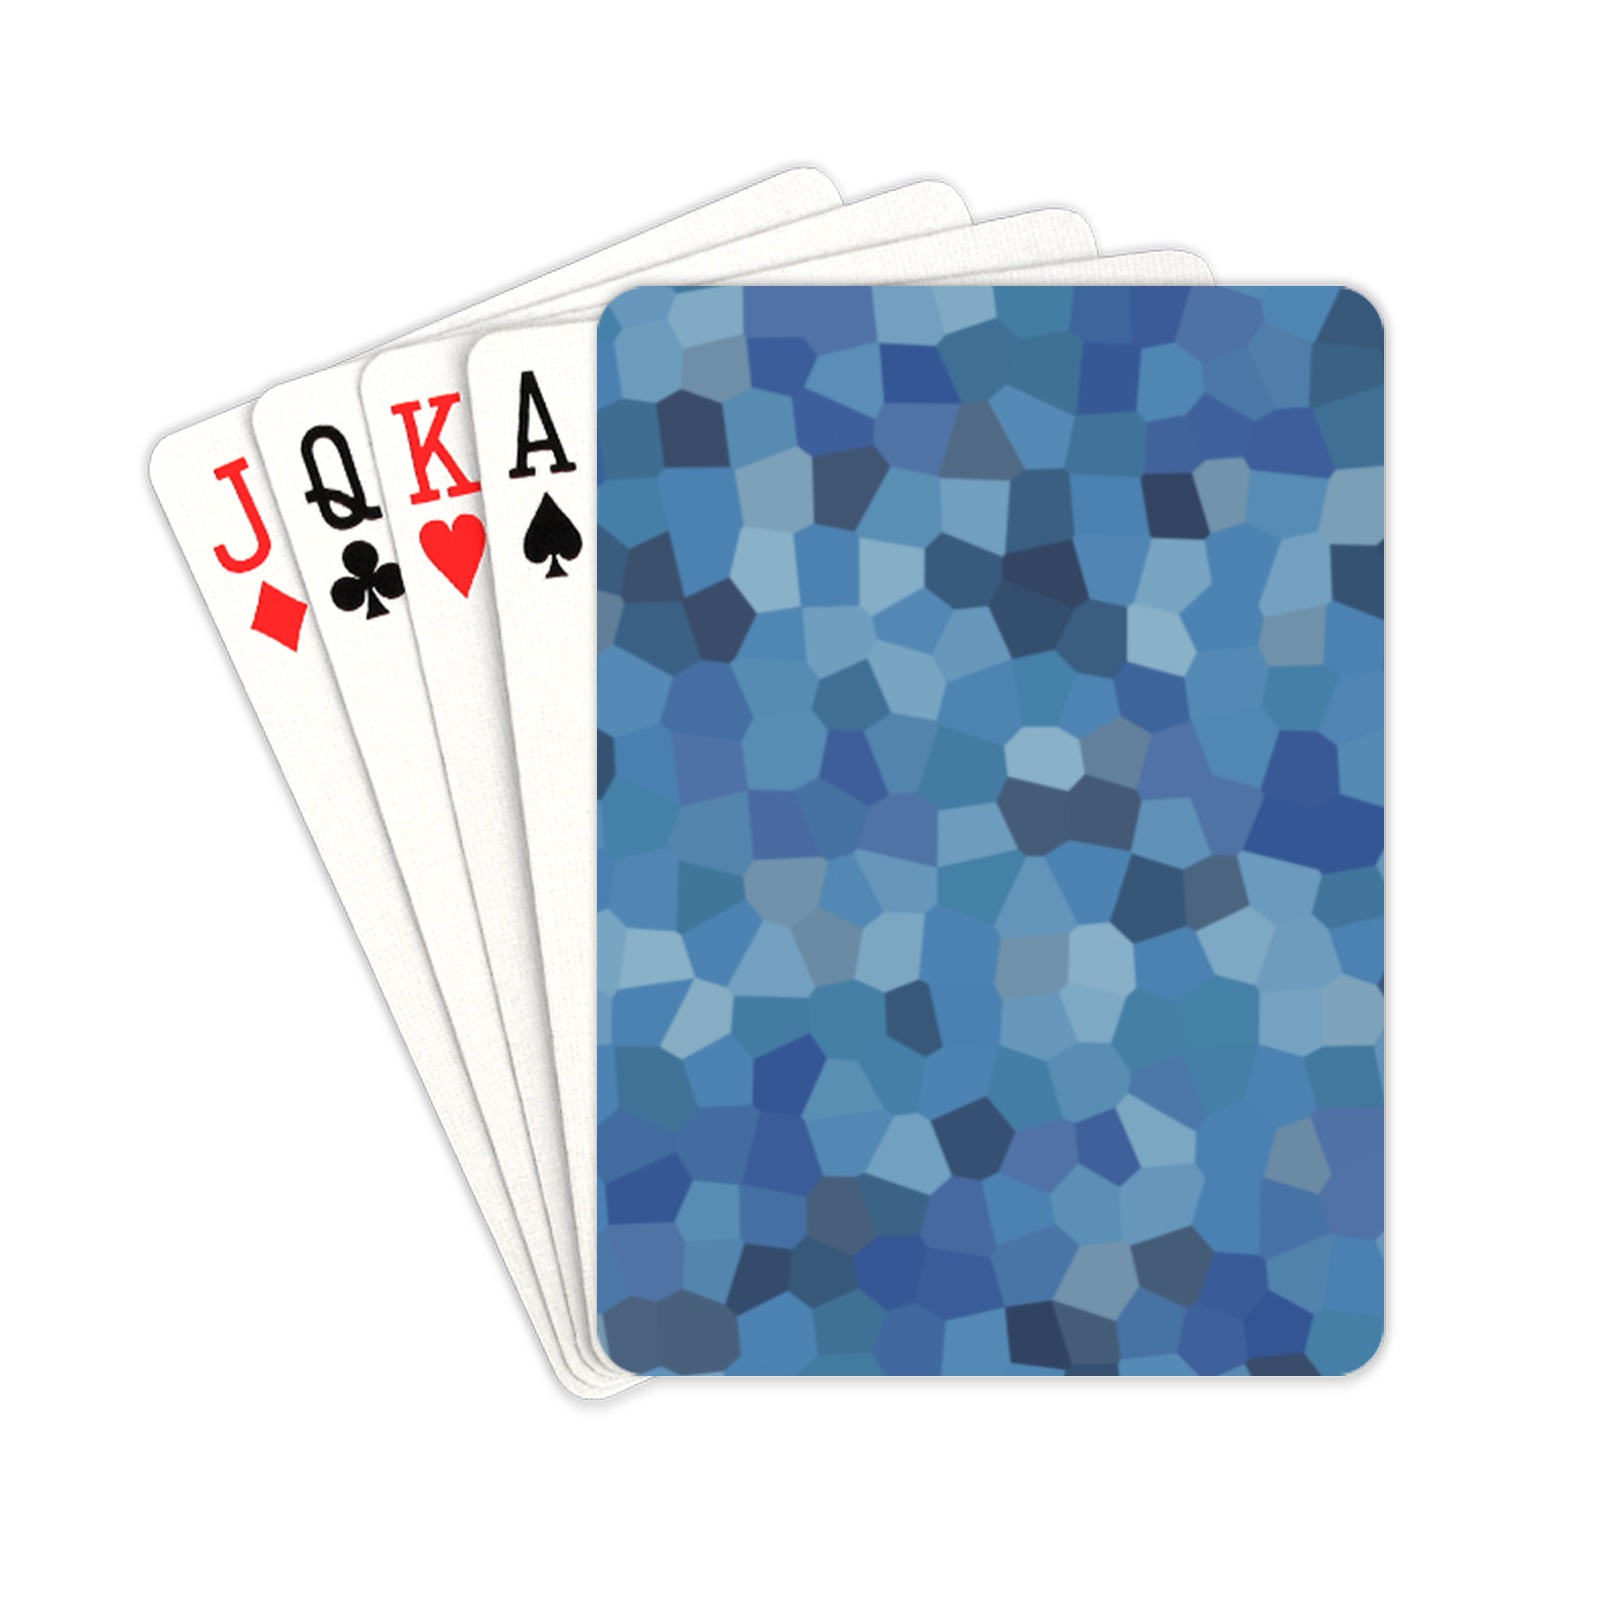 Blue Crystals Abstract Playing Cards 2.5"x3.5"